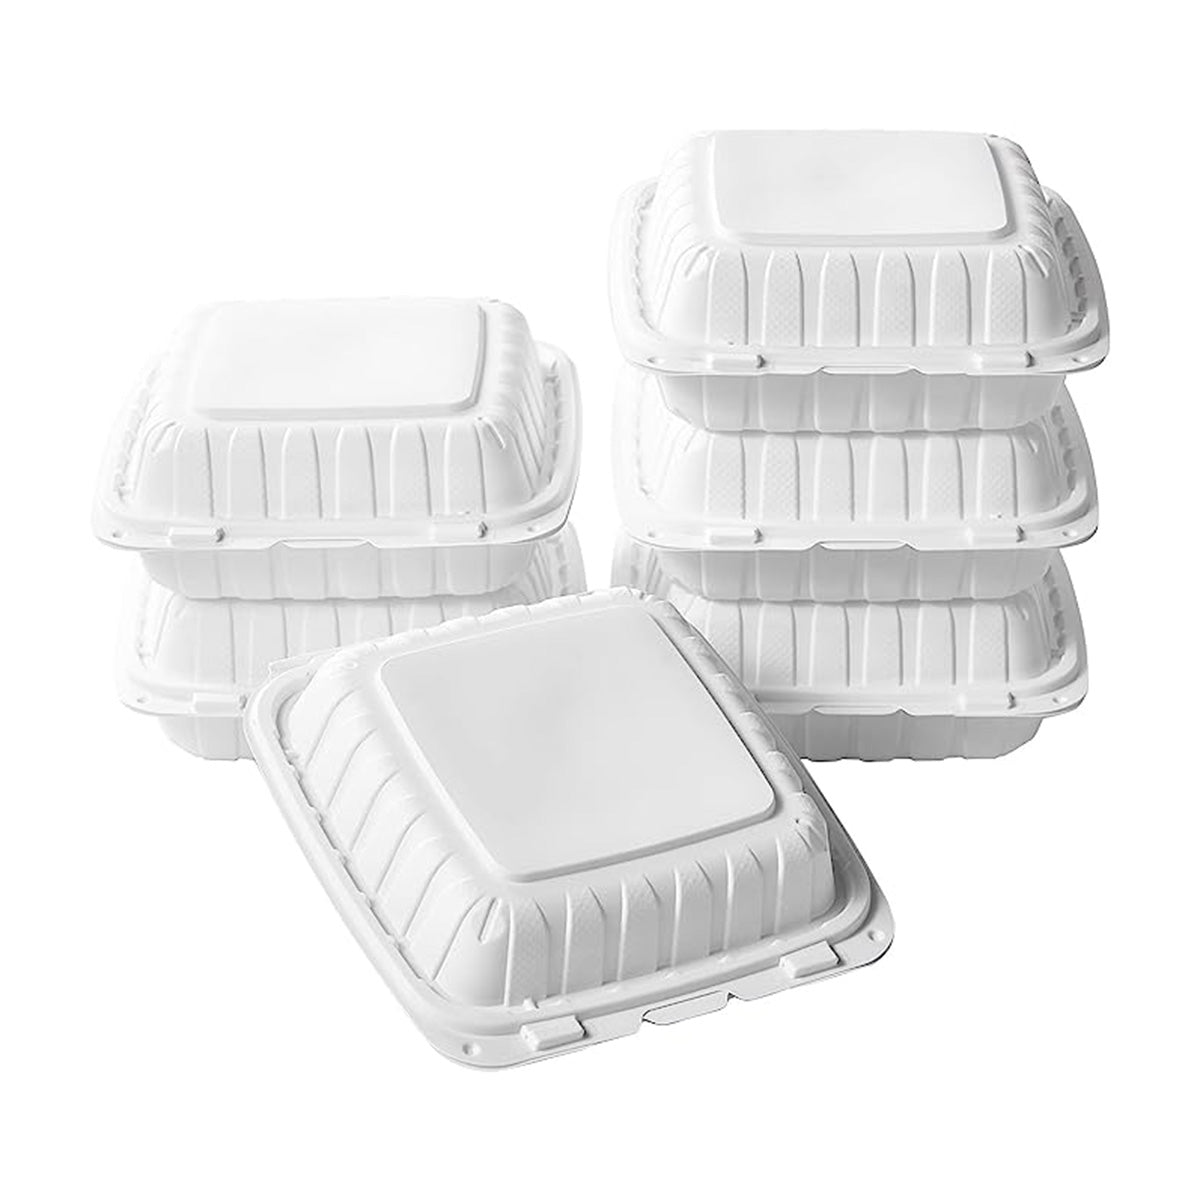 CIAO! 8"x8"X3" MFPP White Hinged Container With Lid 1 Compartment (Case of 200)